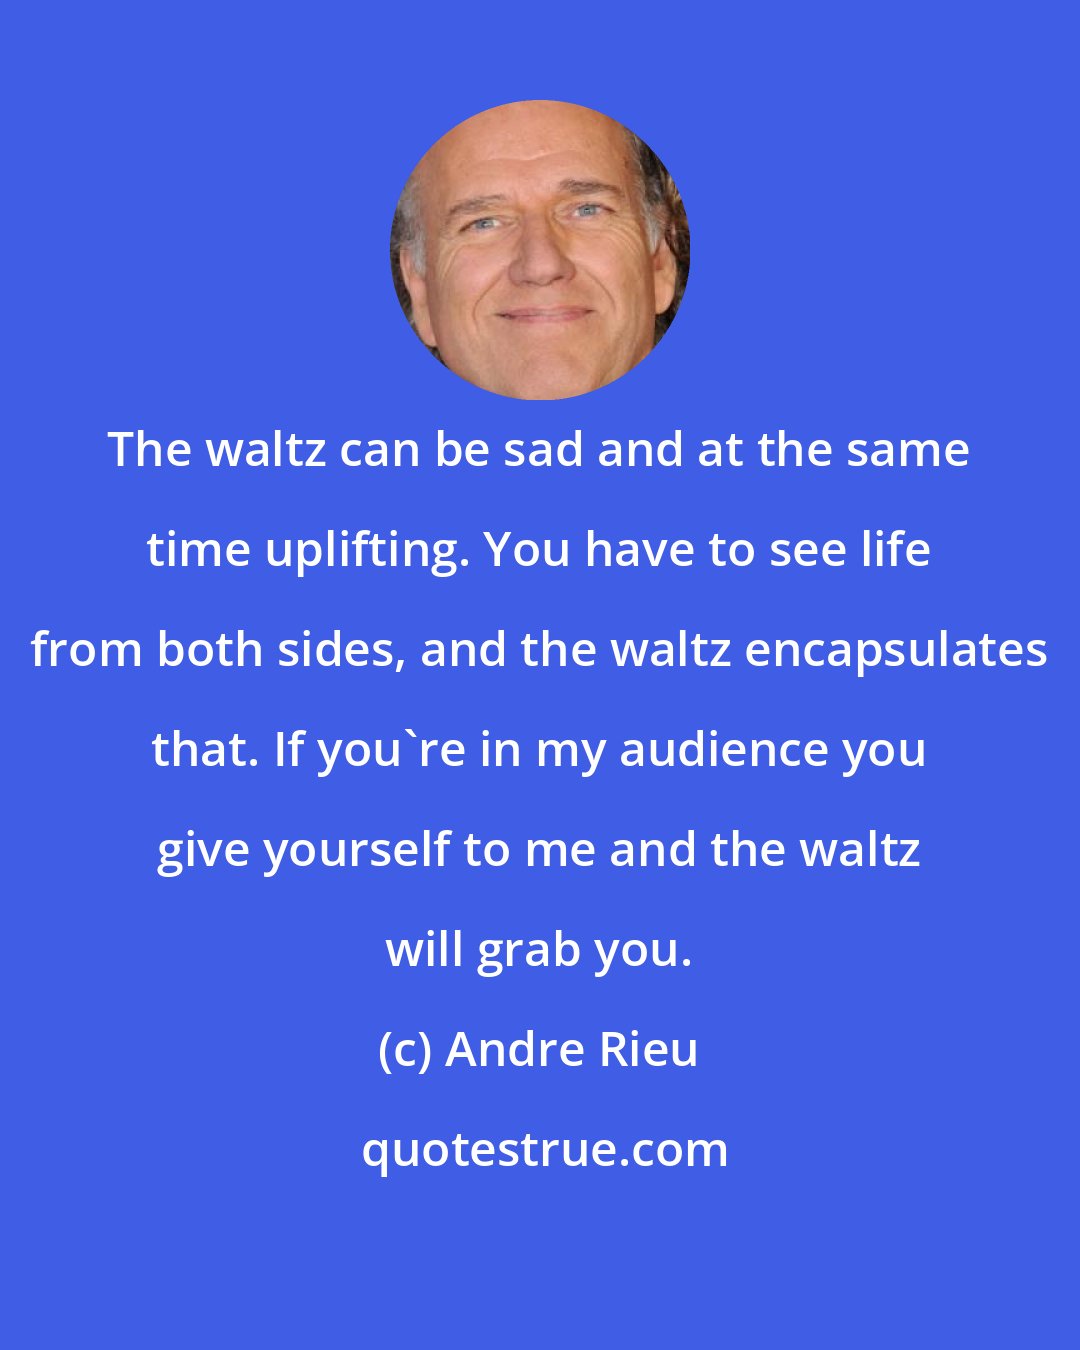 Andre Rieu: The waltz can be sad and at the same time uplifting. You have to see life from both sides, and the waltz encapsulates that. If you're in my audience you give yourself to me and the waltz will grab you.